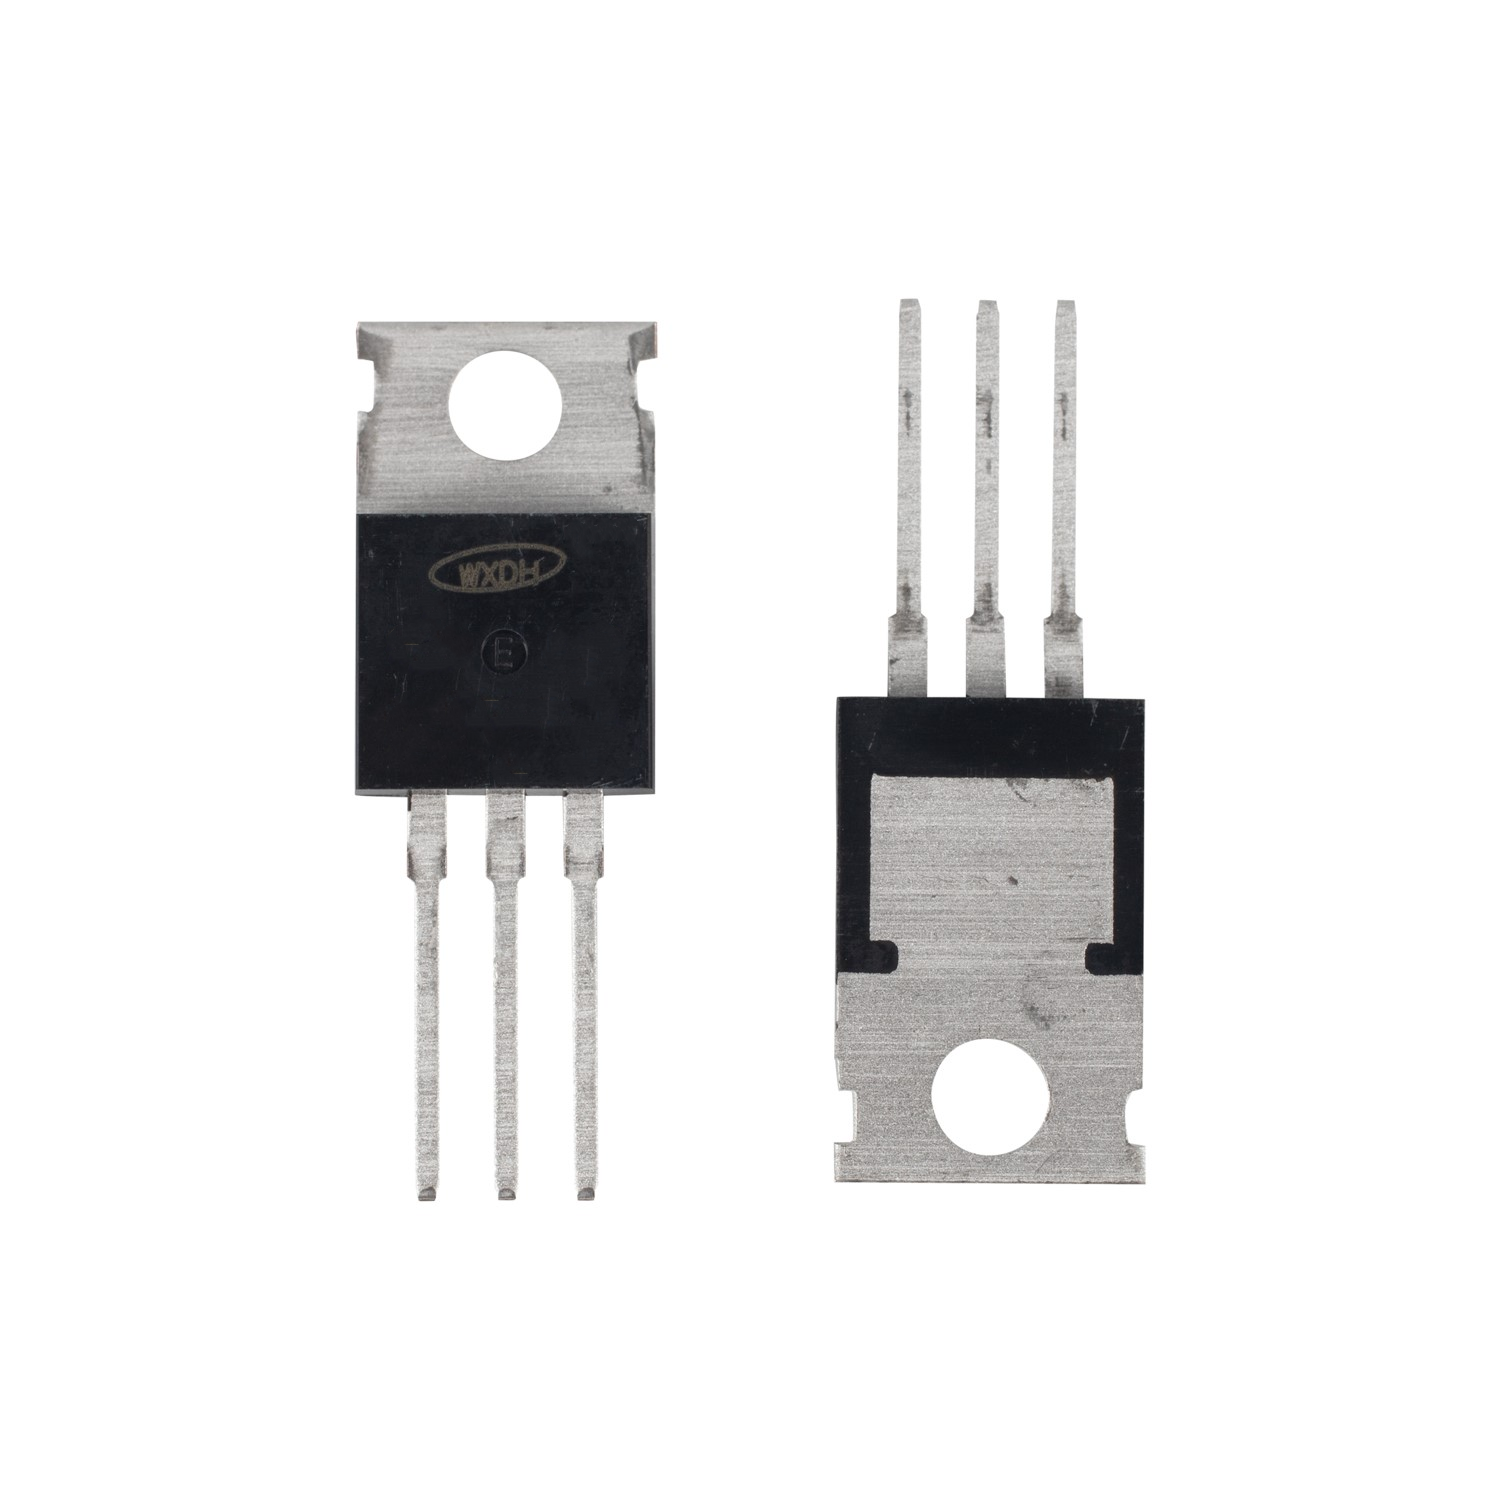 63A 60V N-channel Enhancement Mode Power MOSFET